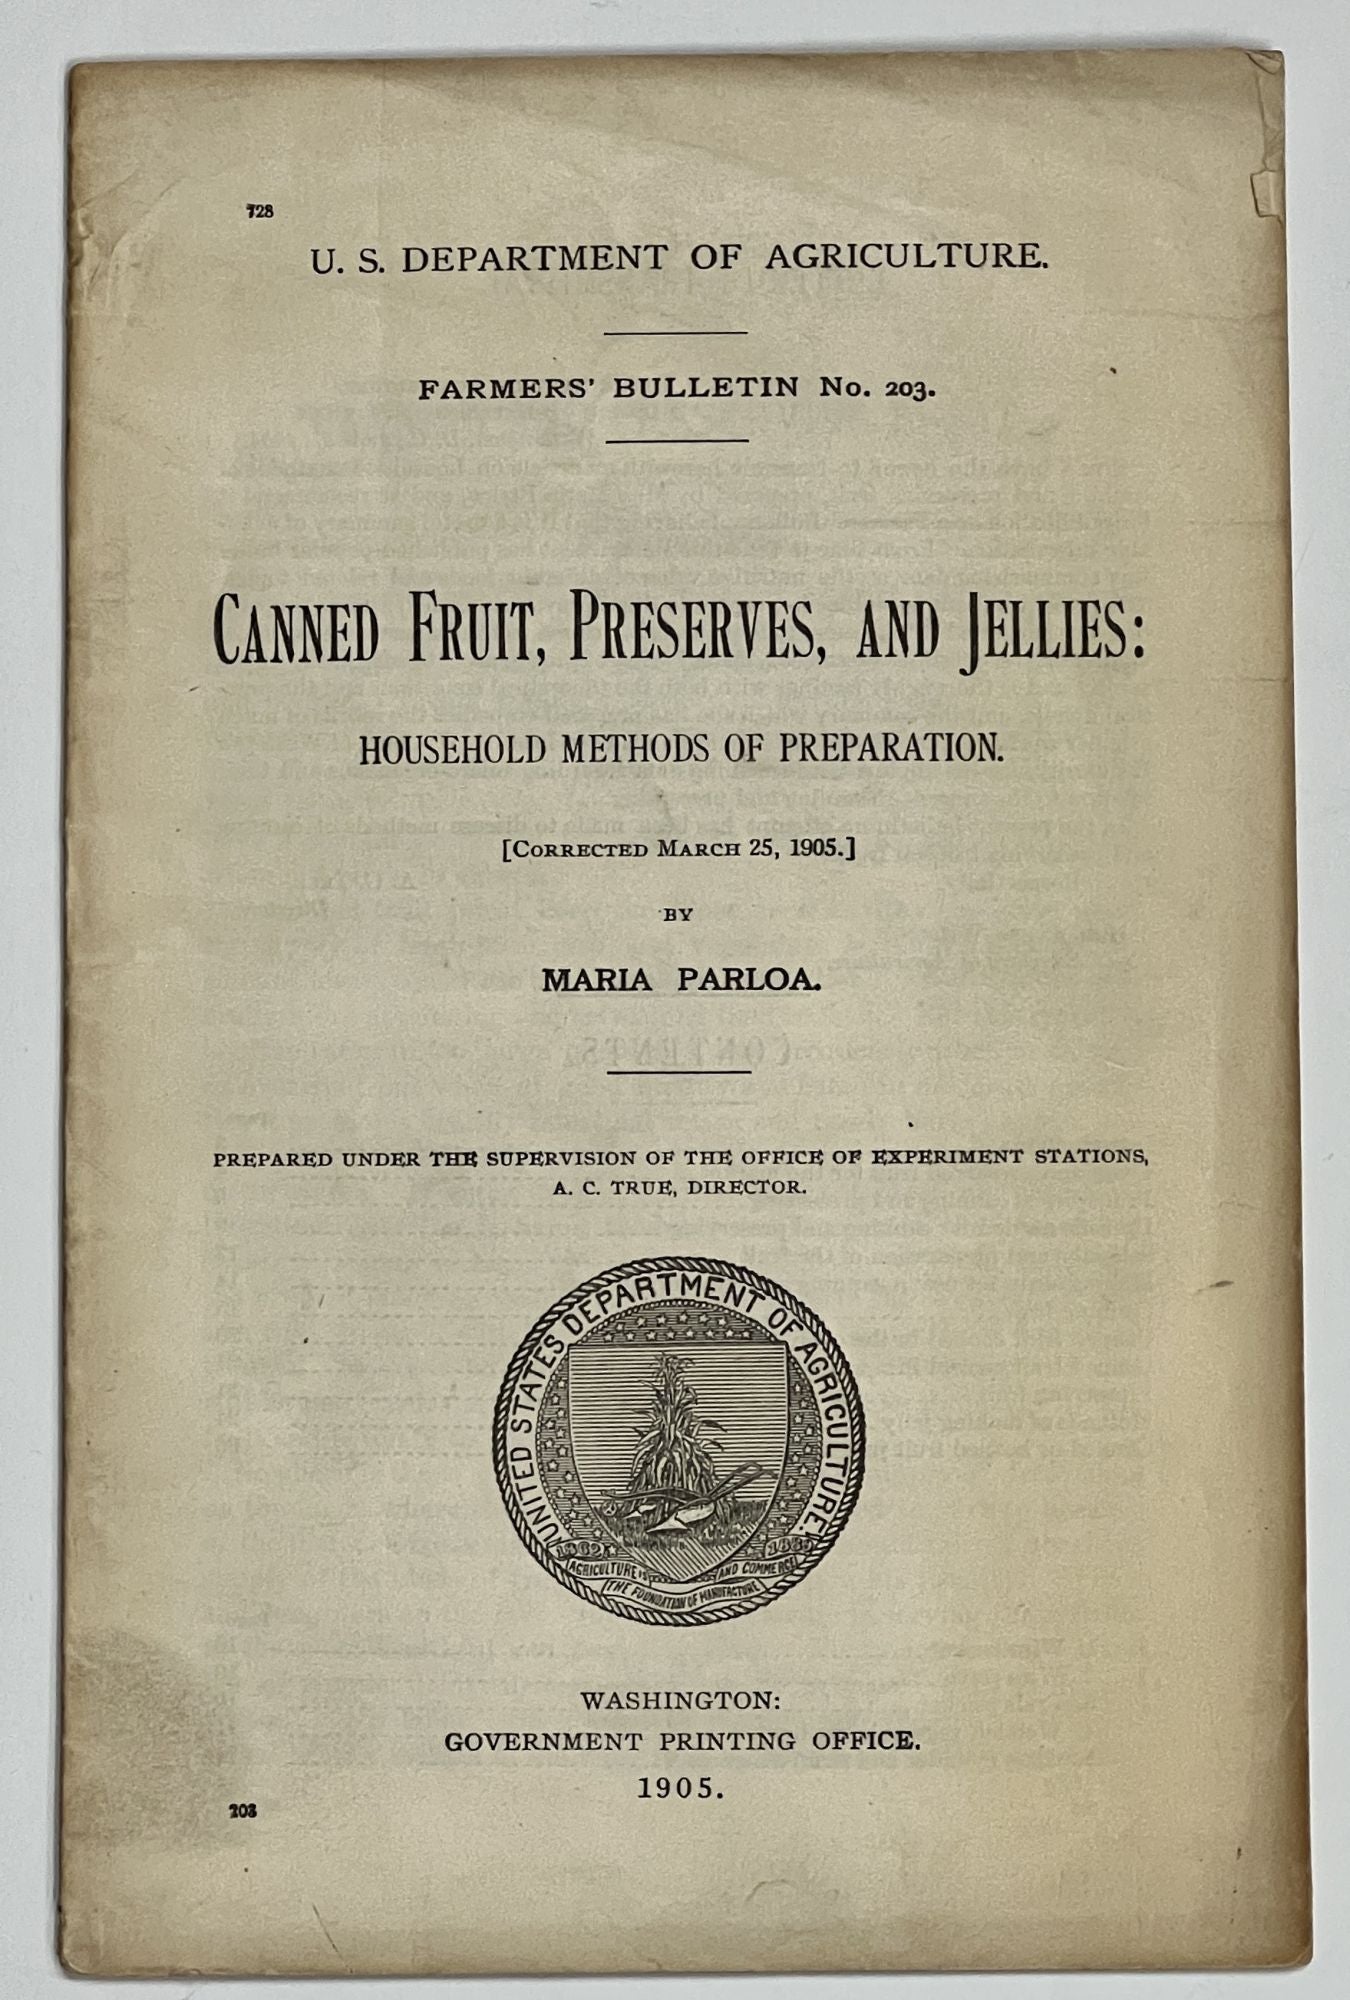 Parloa, Maria. Prepared under the Supervision of the Office of Experiment Stations, A. C. True, Director - CANNED FRUIT, PRESERVES, And JELLIES: HOUSEHOLD METHODS Of PREPARATION. U.S. Department of Agriculture Farmers' Bulletin No. 203